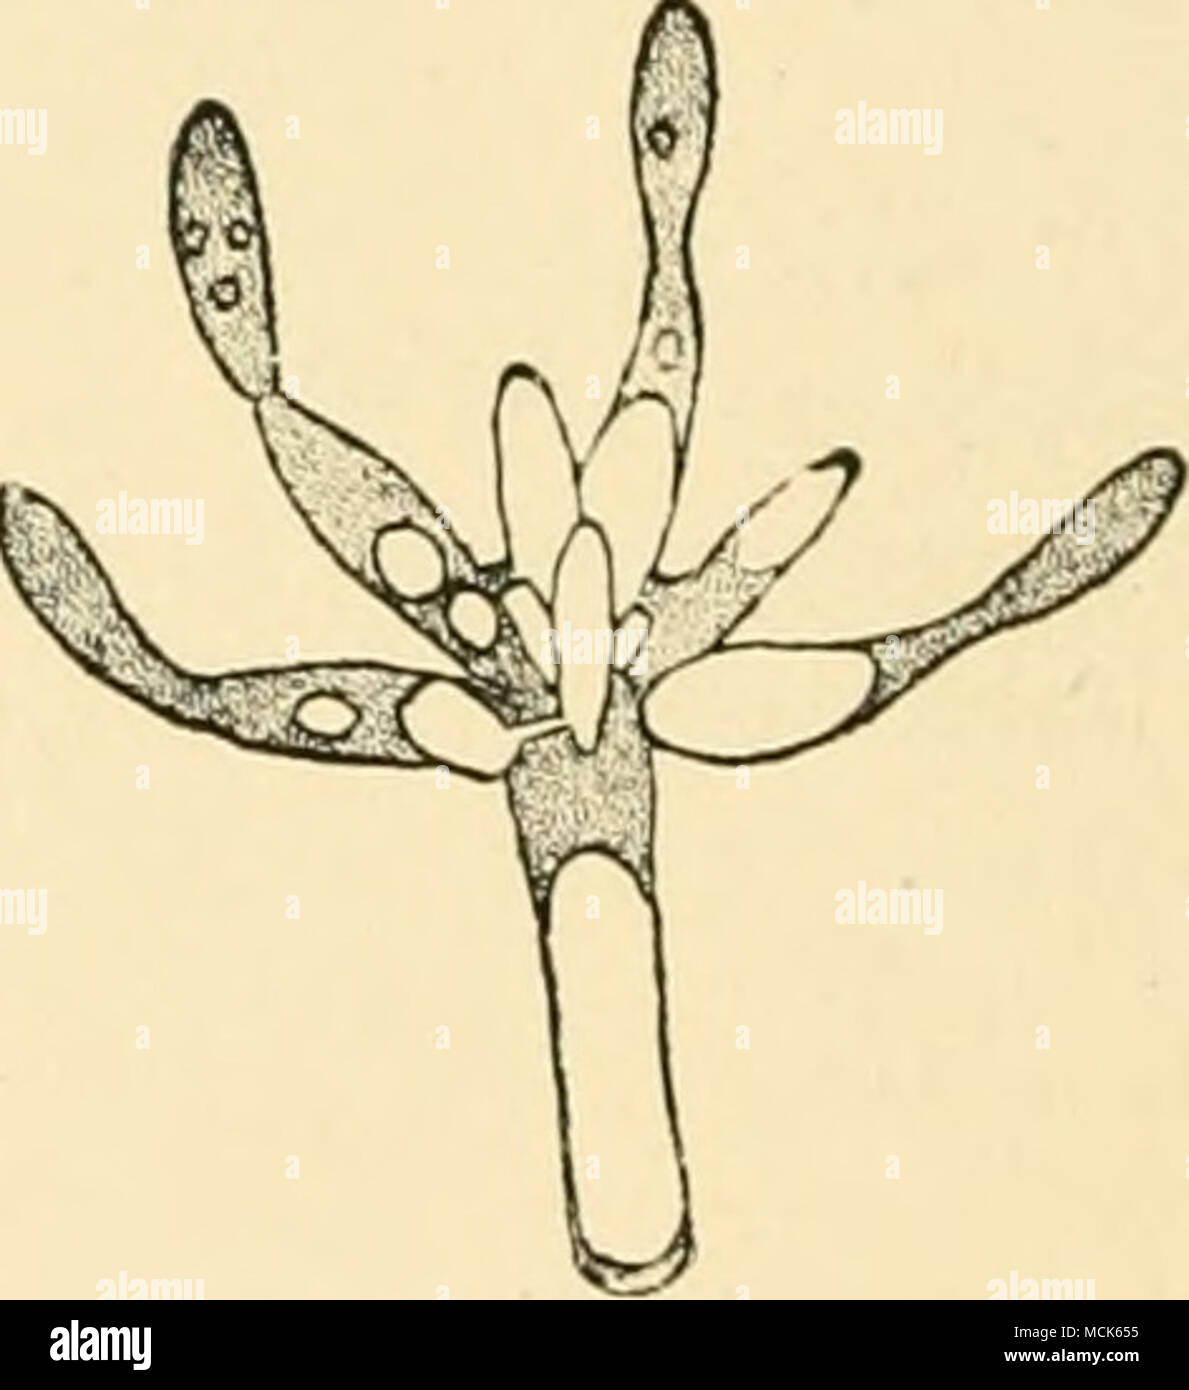 . Fic). 175.—Tuburcinia trientalis. Spore- Fio. 176.—Apex of an isolated promy- mass germinating; several promycelia have celium from Fig. 175 ; it carries a whorl of been produced and are proceeding to form branches, some of which have fused in pairs; whorls of branches. (After Woronin.) all are developing conidia. (After Woronin.) spaces of the pith and rind-parenchyma, also the vessels. The hyphae apply themselves closely to the cell-walls, and certain short branched hyphae actually penetrate into the cells. The spore-masses are developed from delicate branched multiseptate filaments of the Stock Photo